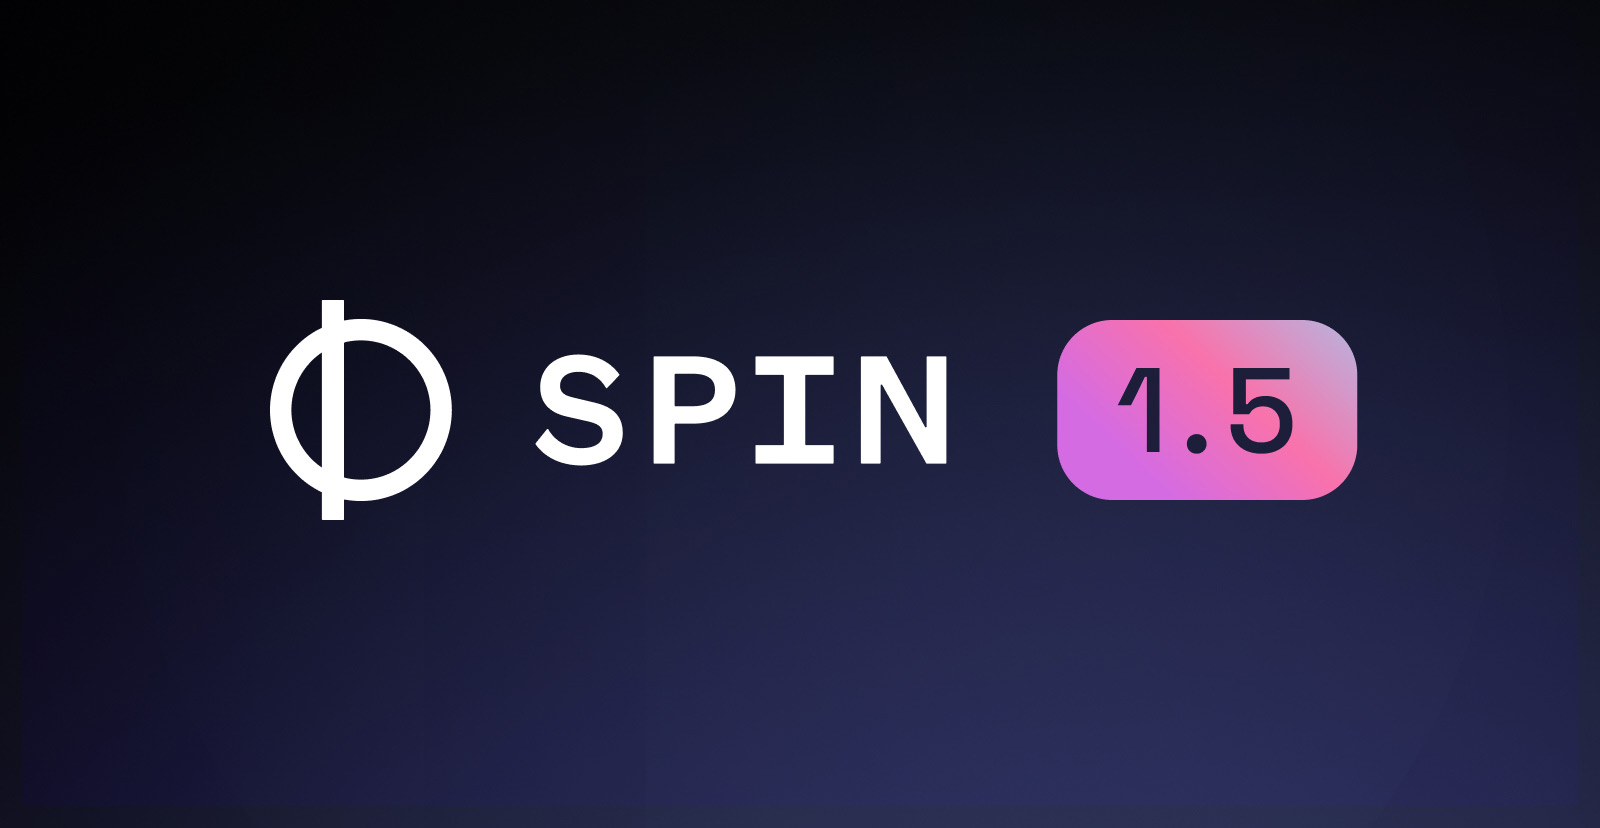 Announcing Spin 1.5